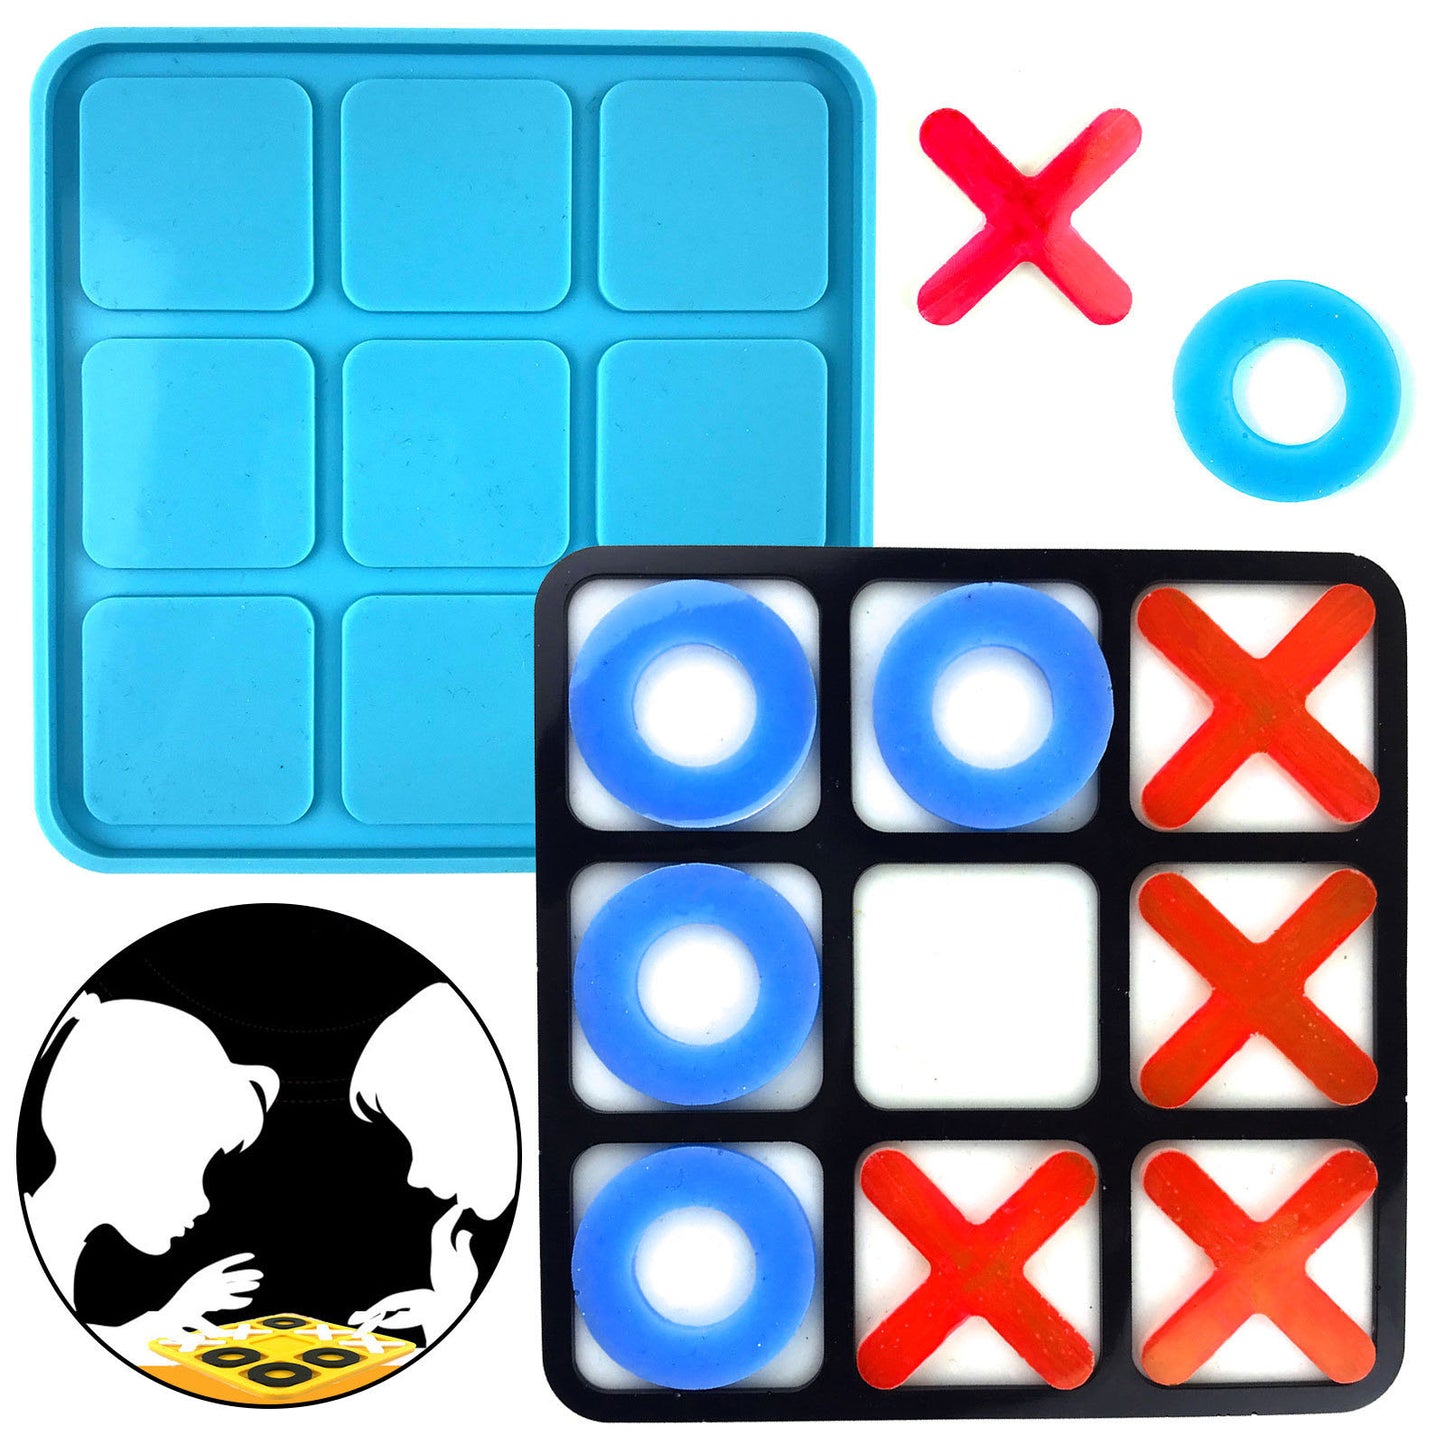 Tic Tac Toe Resin Mold with 4 Chess Pieces Molds for Tabletop Game